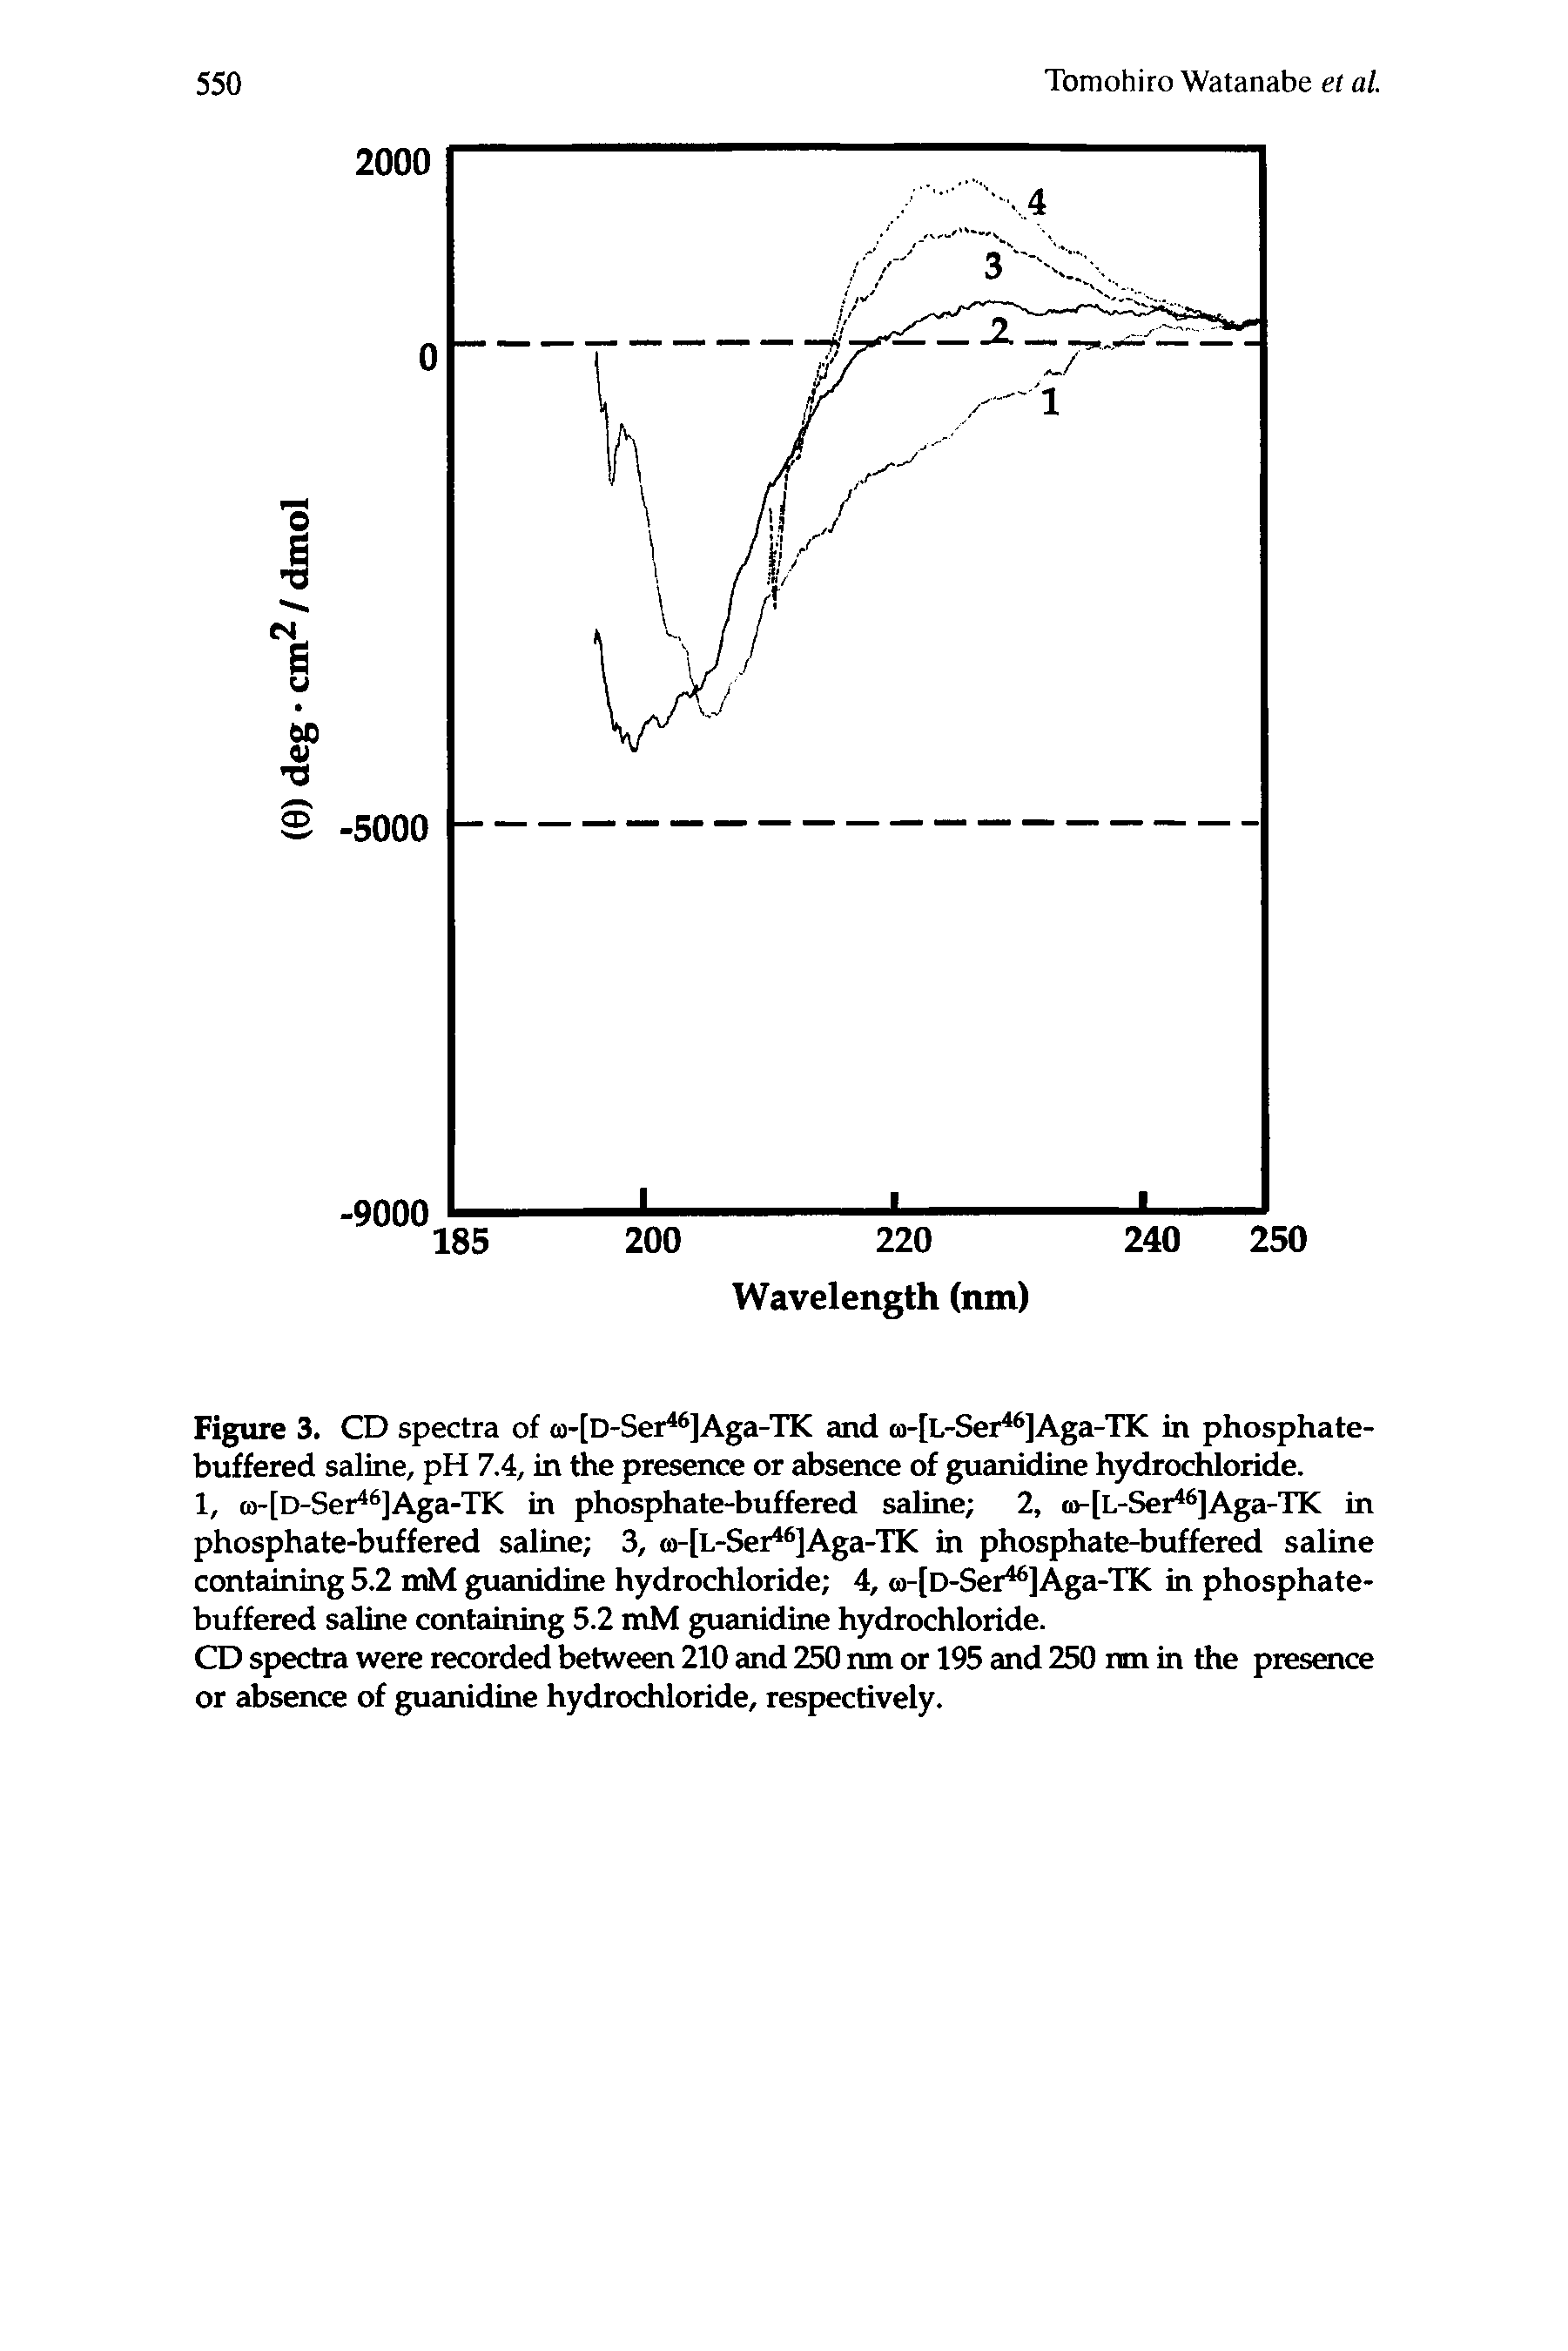 Figure 3. CD spectra of co-[D-Ser ]Aga-TK and to-[L-Ser ]Aga-TK in phosphate-buffered saline, pH 7.4, in the presence or absence of guanidine hydrochloride.